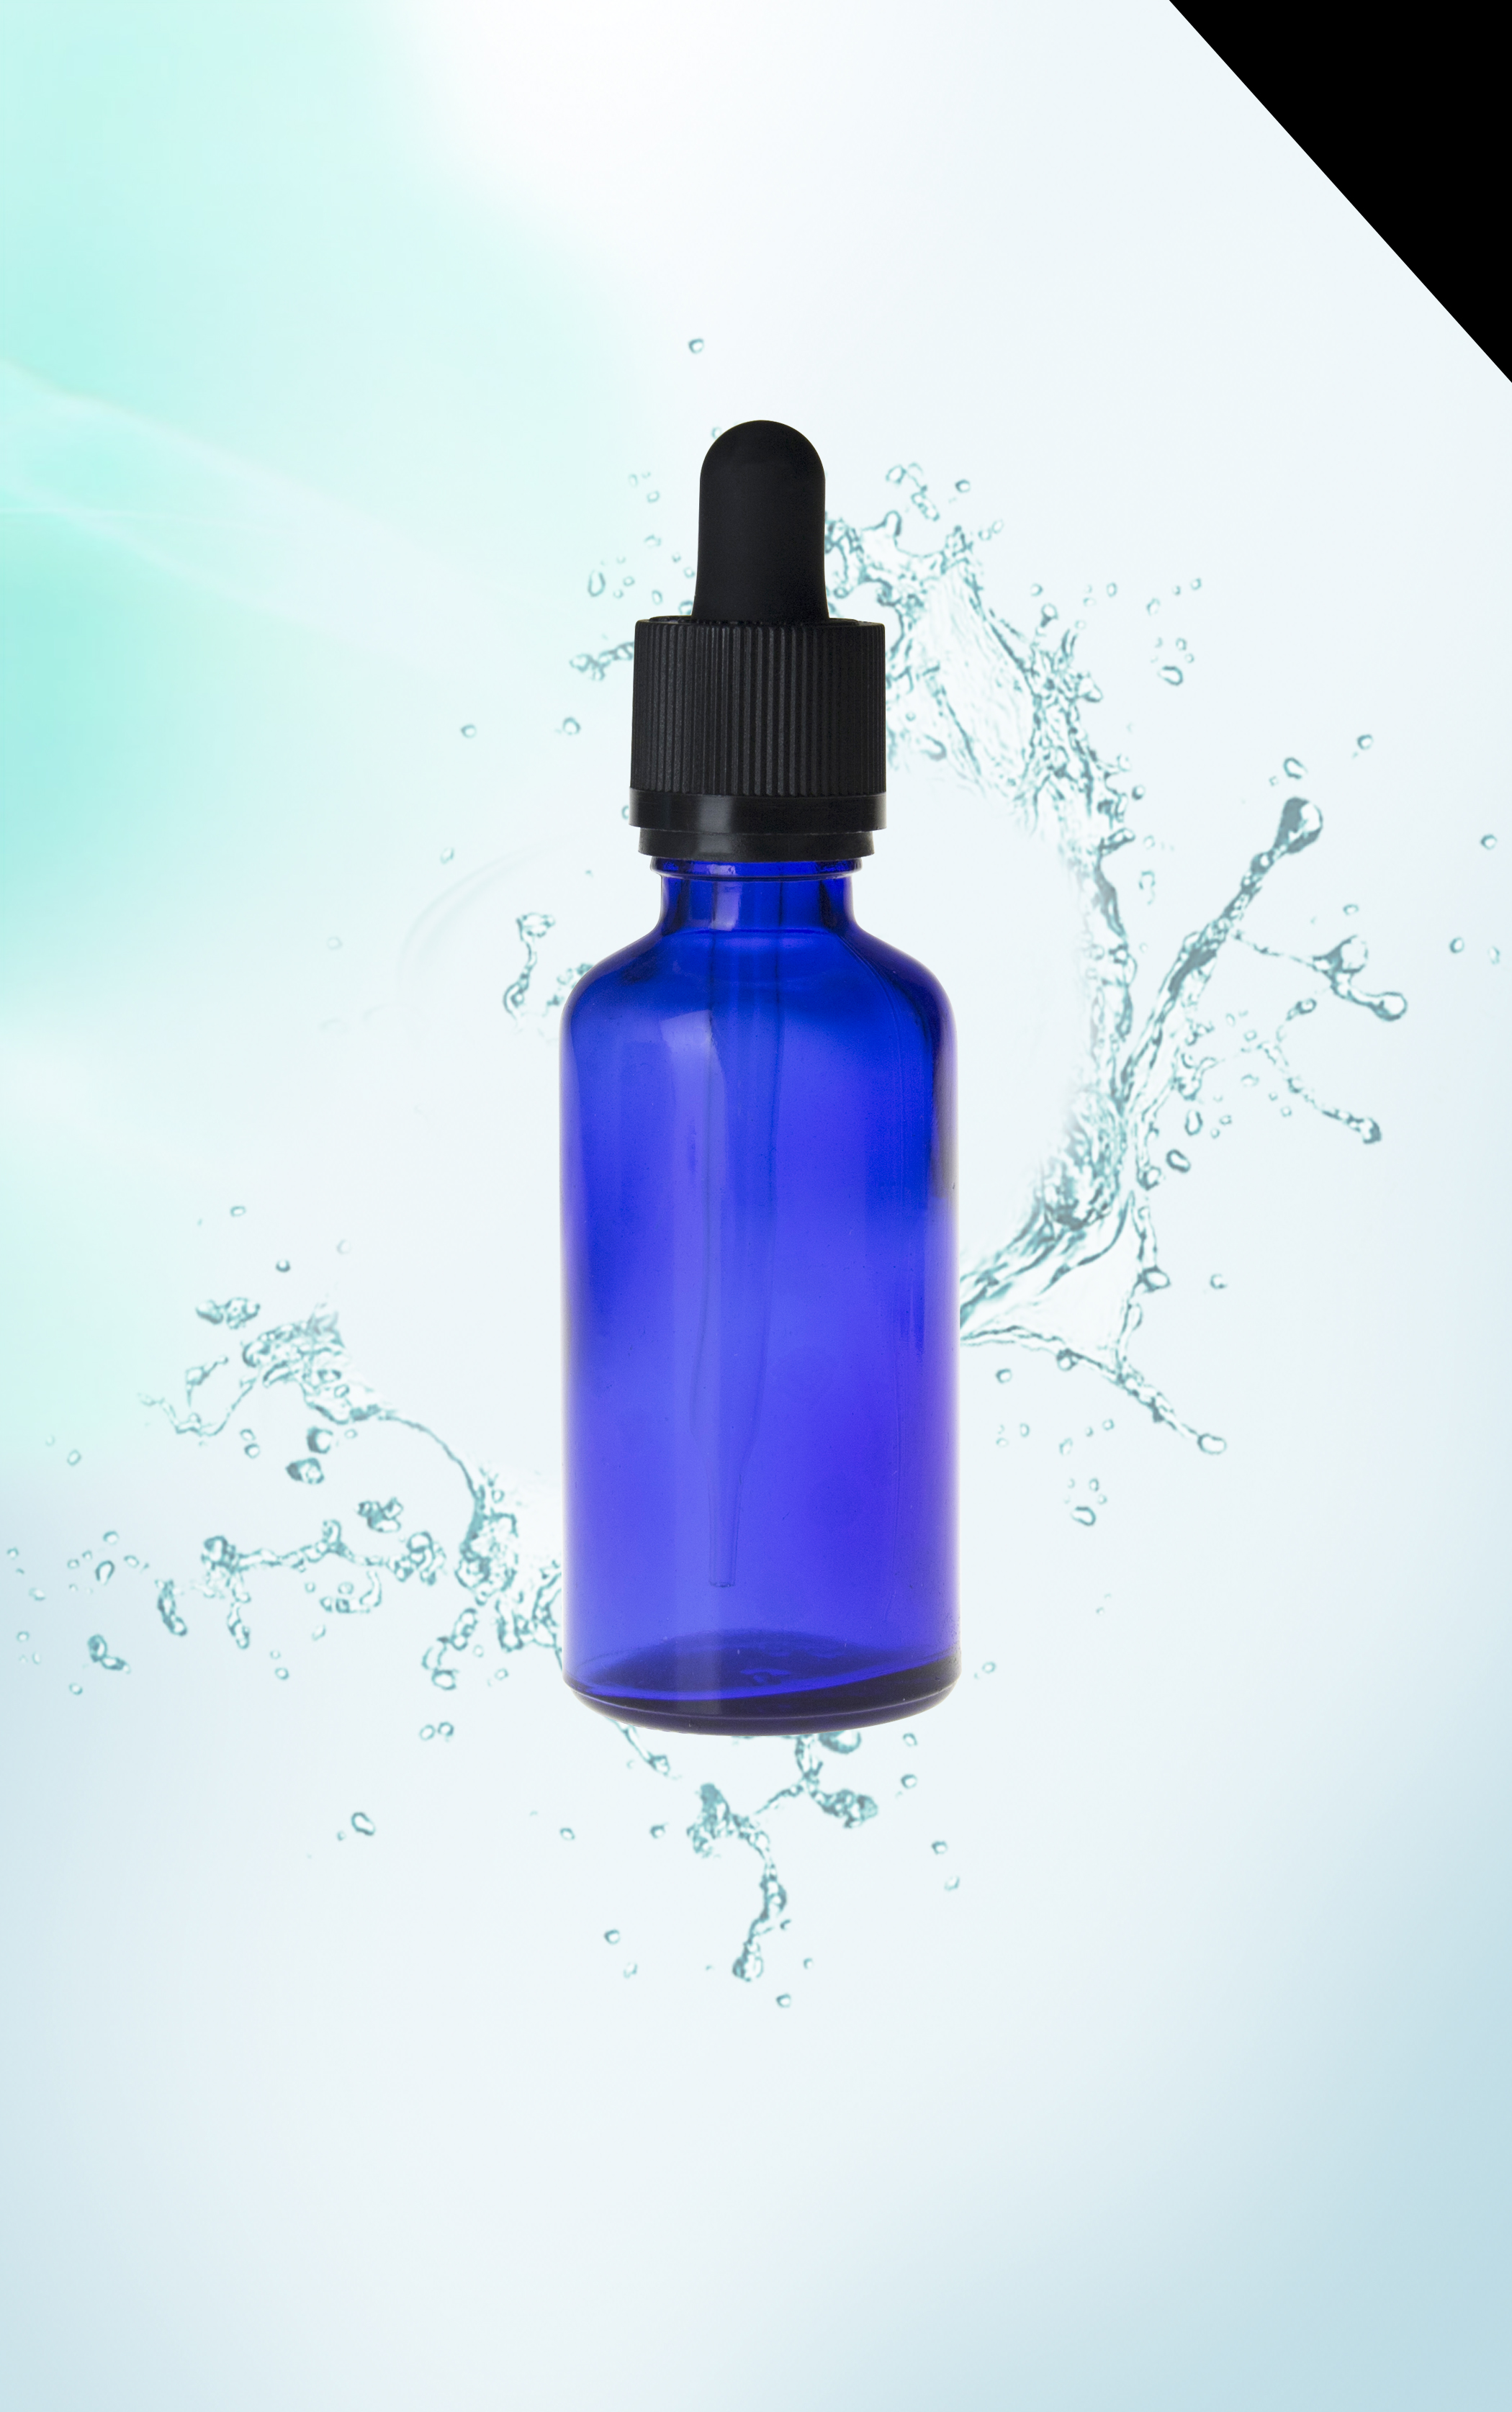 50ml blue green glass bottle with childproof tamper cap Featured Image